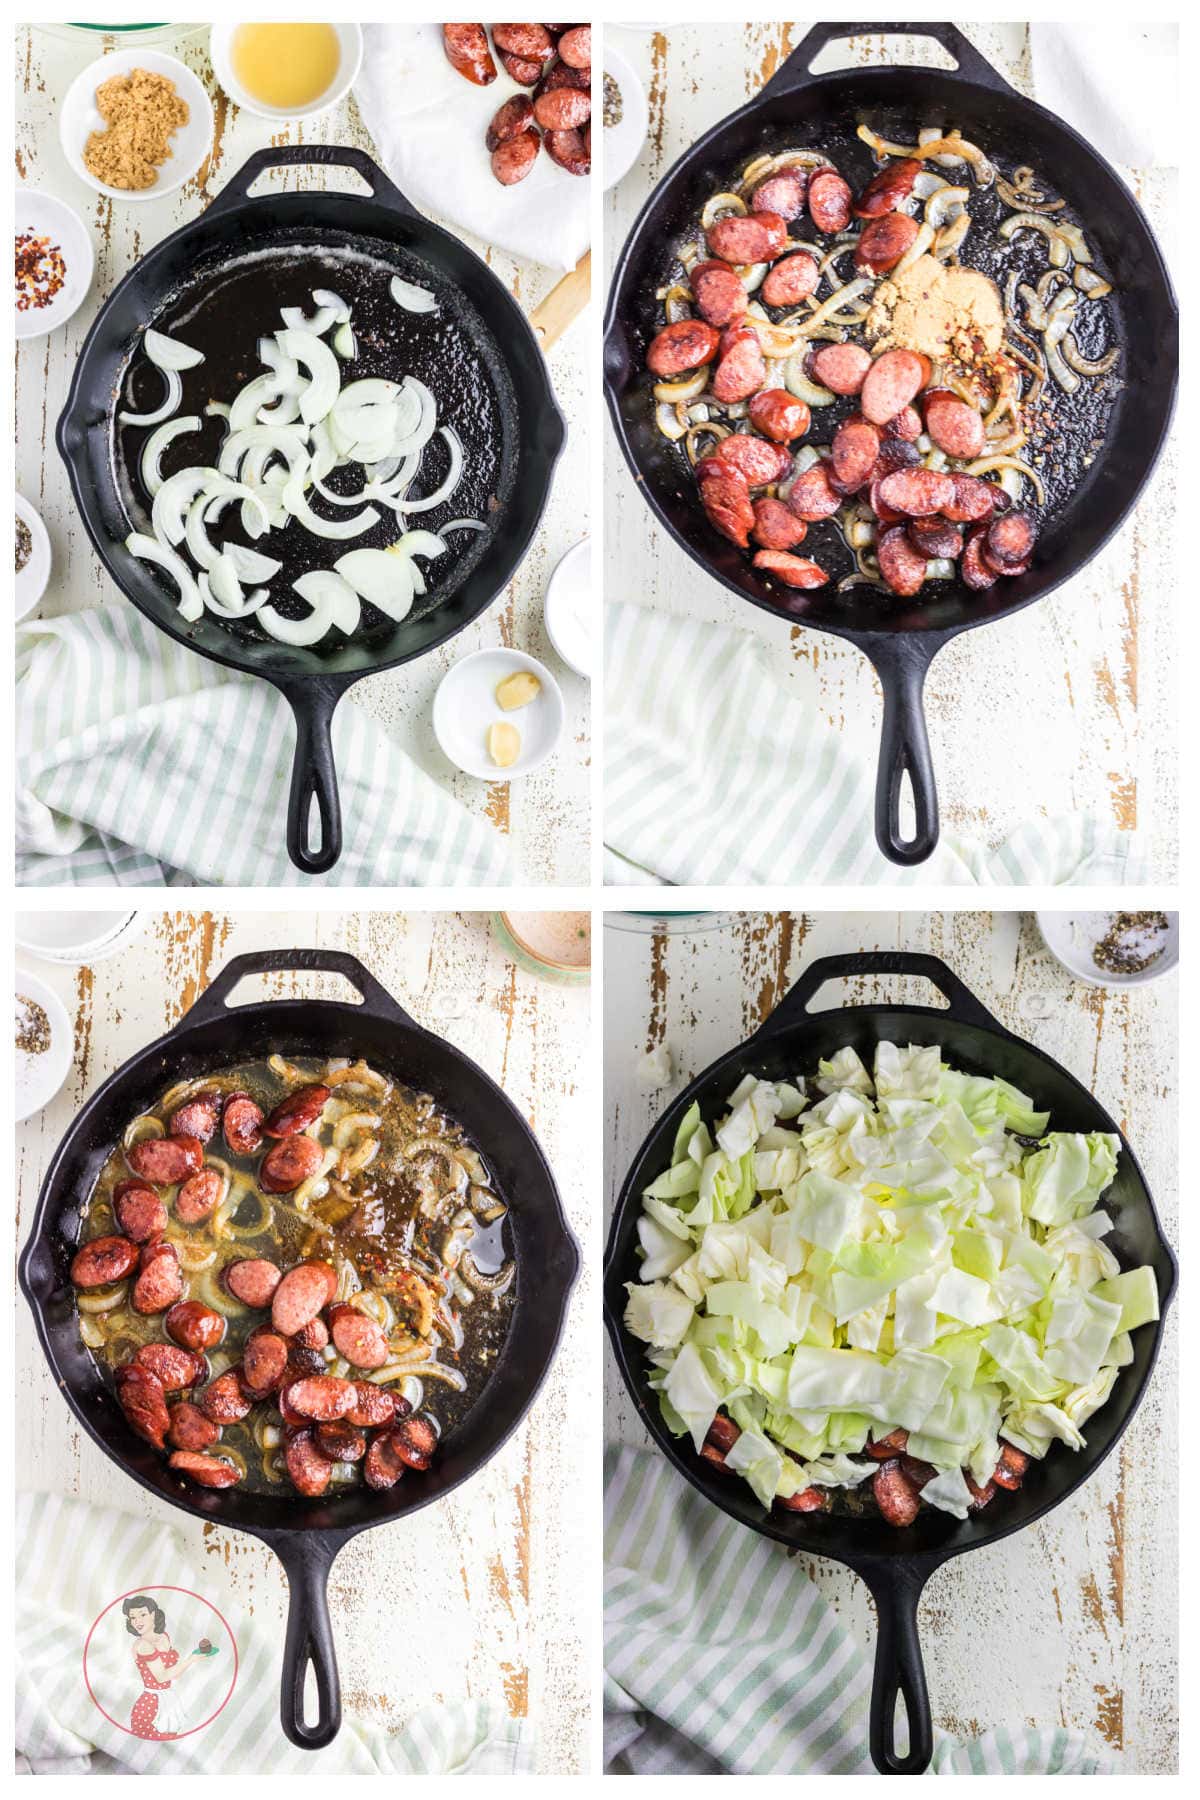 Step by step images showing how to make kielbasa and cabbage.